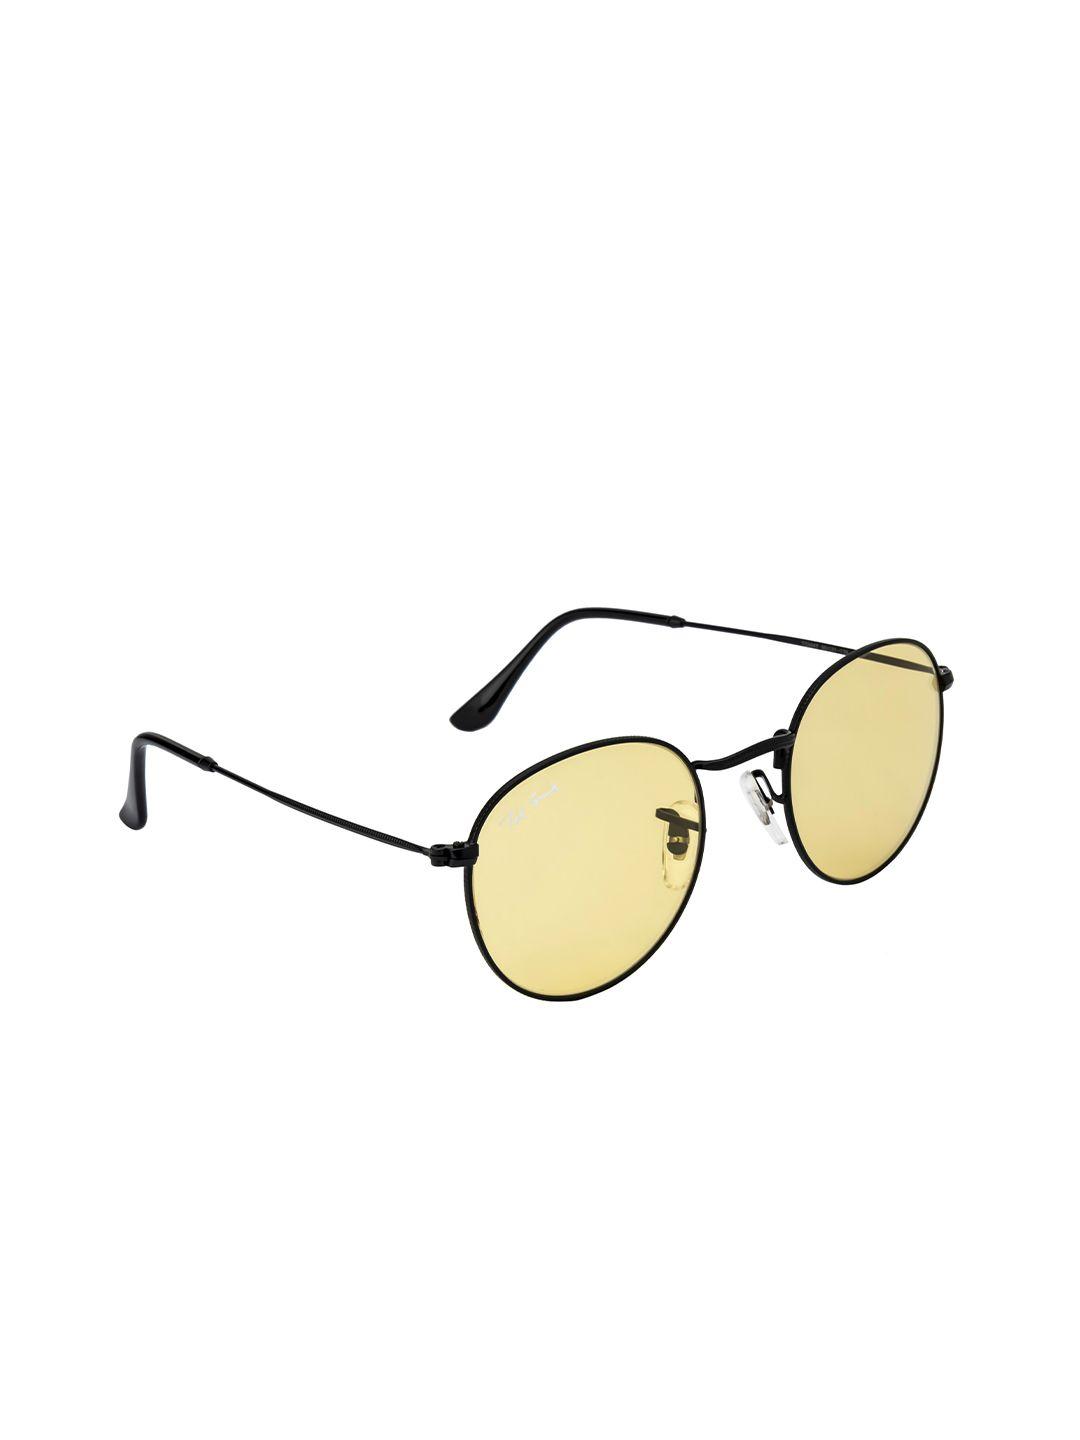 ted smith unisex yellow lens & black round sunglasses with uv protected lens - moon_c5